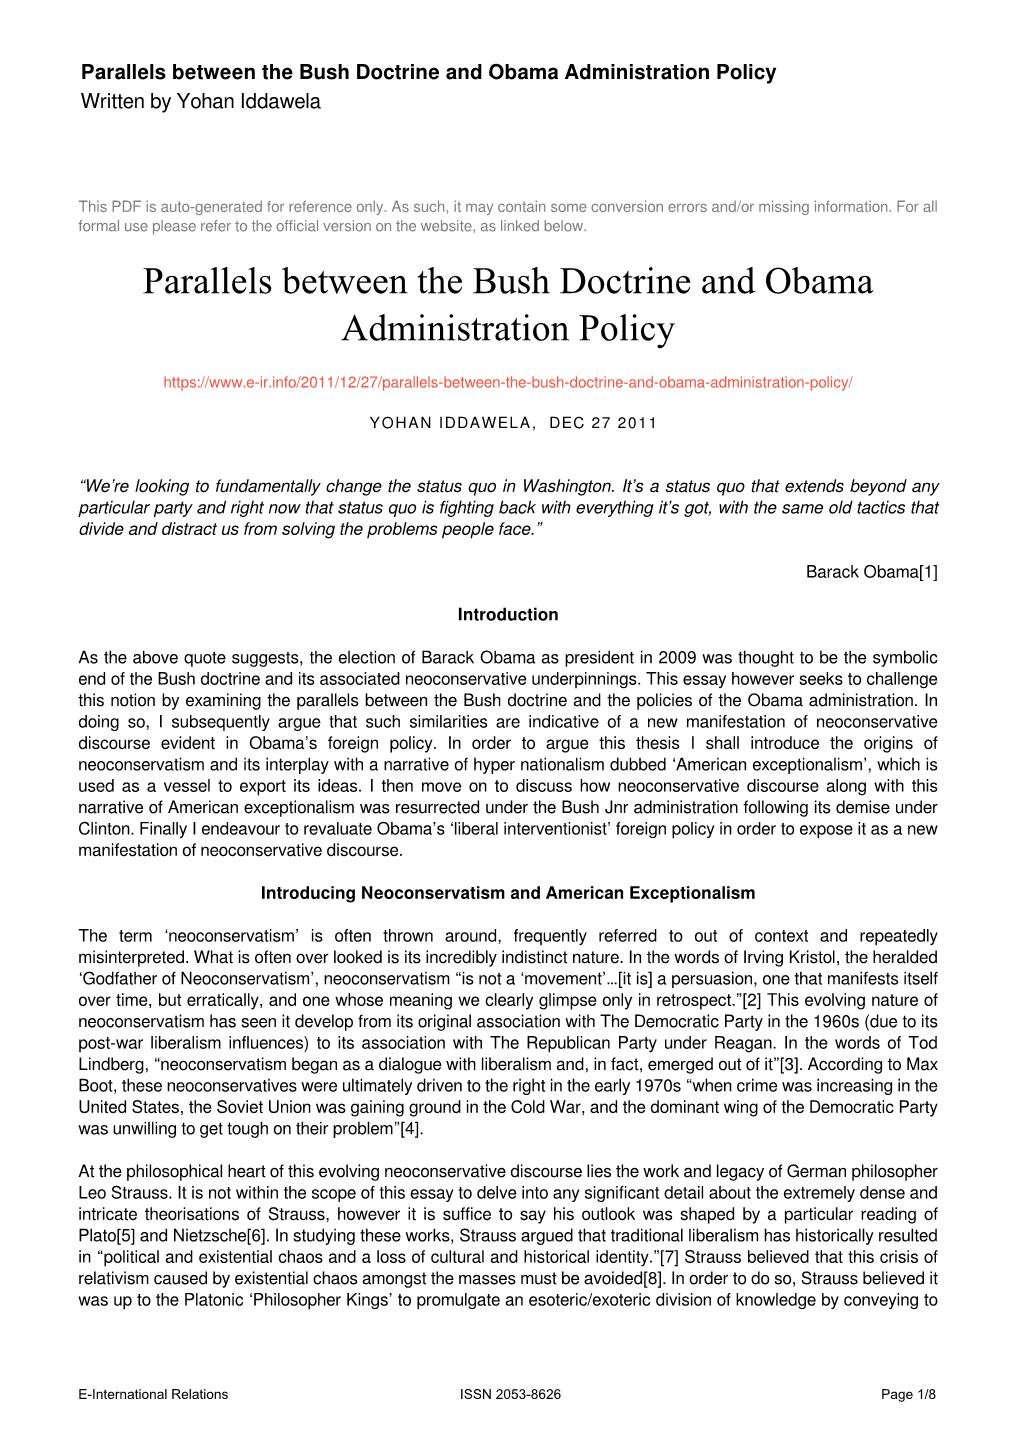 Parallels Between the Bush Doctrine and Obama Administration Policy Written by Yohan Iddawela